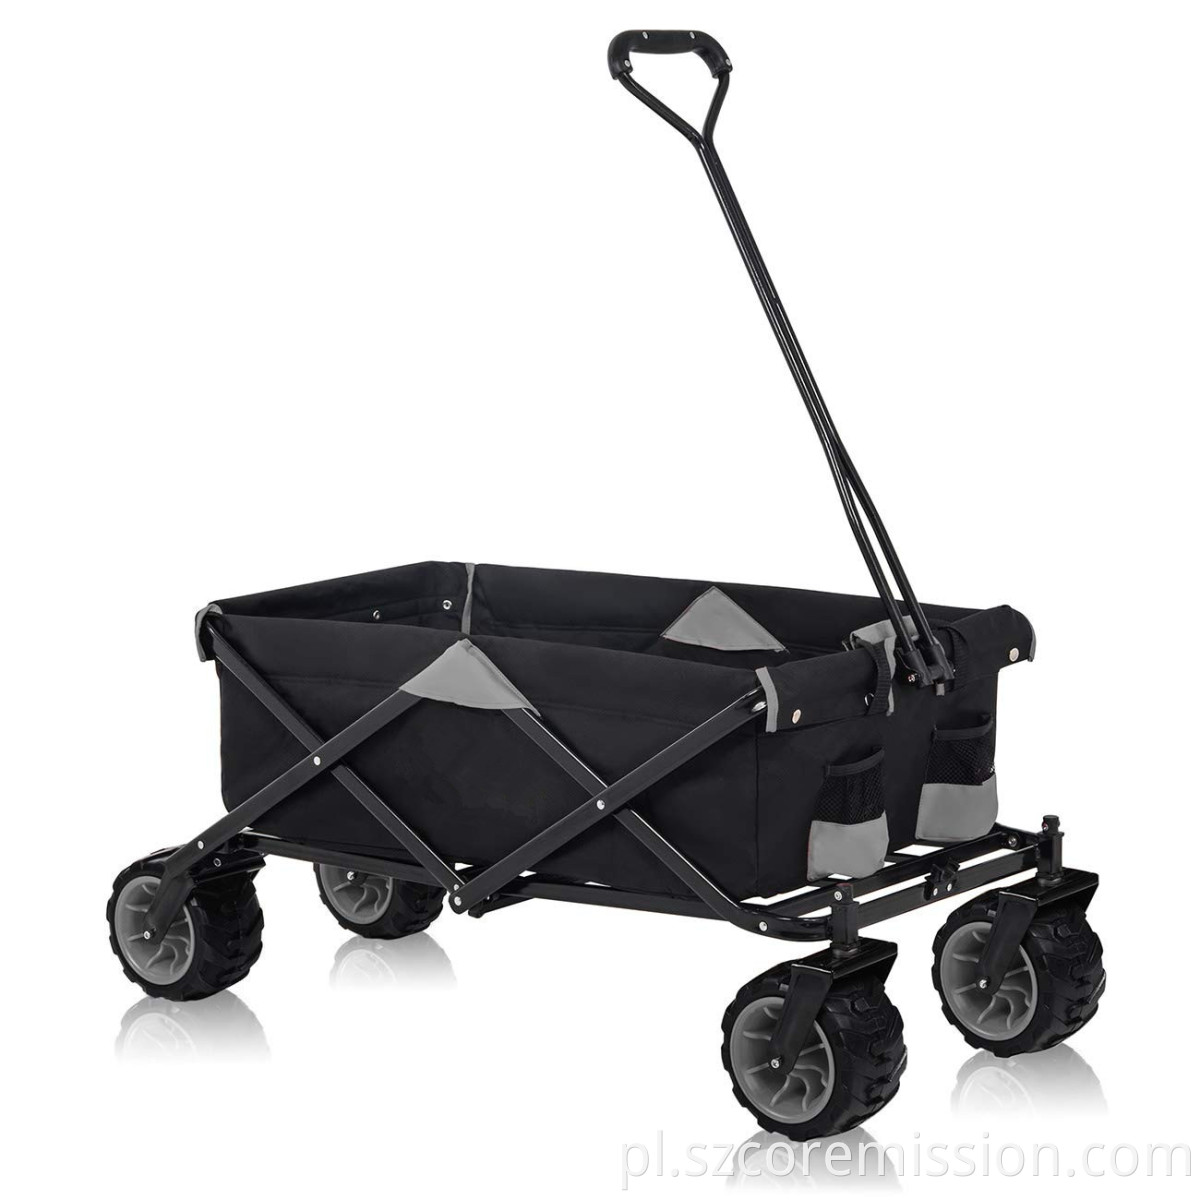 Collapsible Utility Garden Beach Trolley Cart with Handle